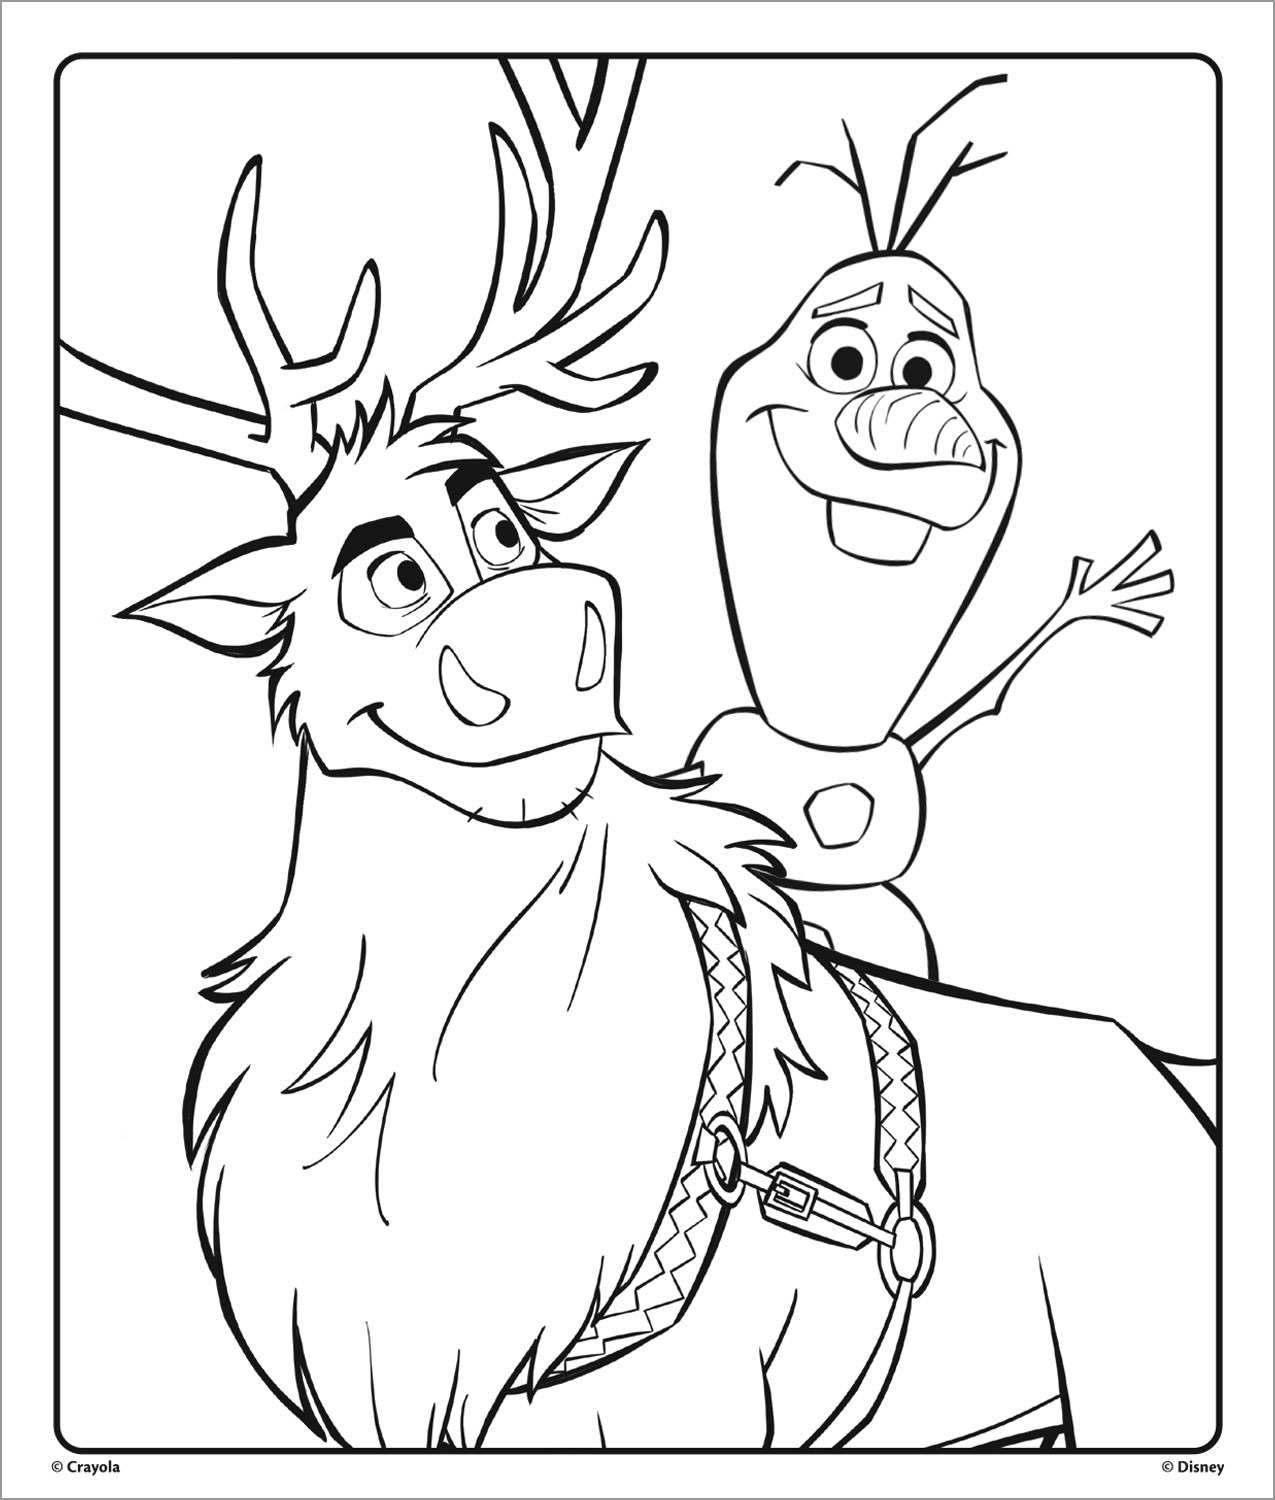 Olaf and Sven Frozen Coloring Page.